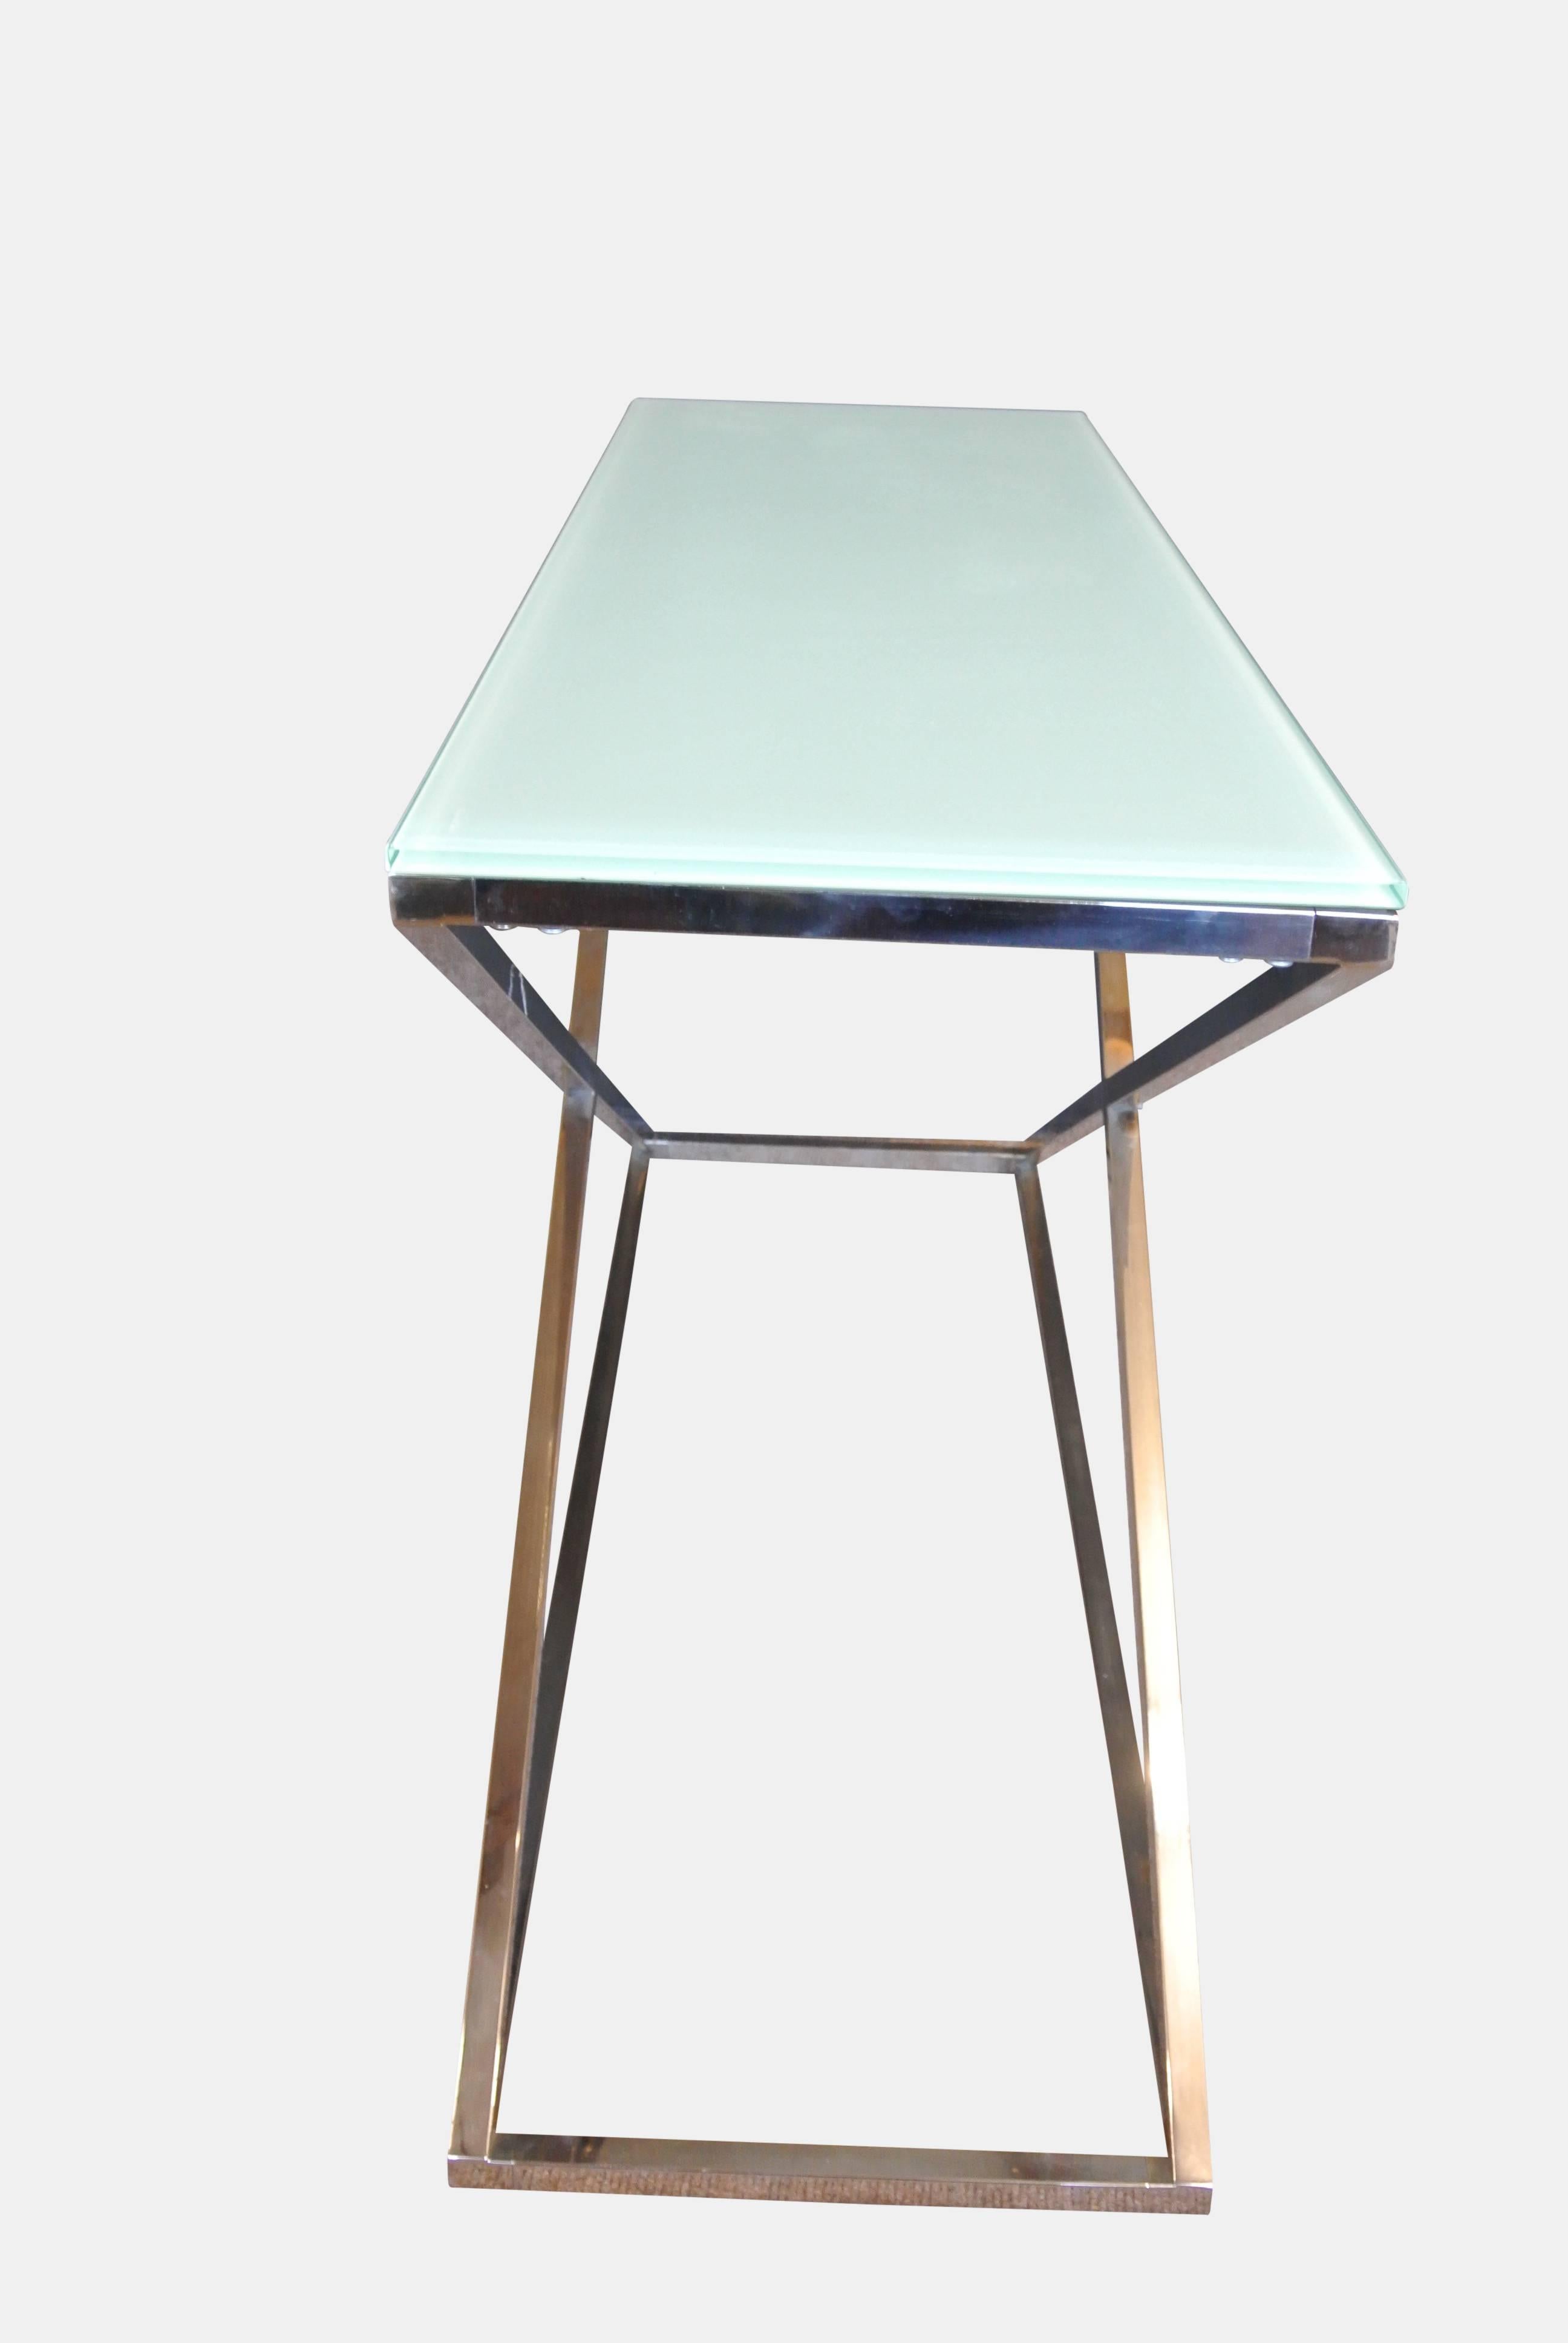 A Modern Eicholtz criss cross stainless steel console table with opaque tempered glass top, as new.